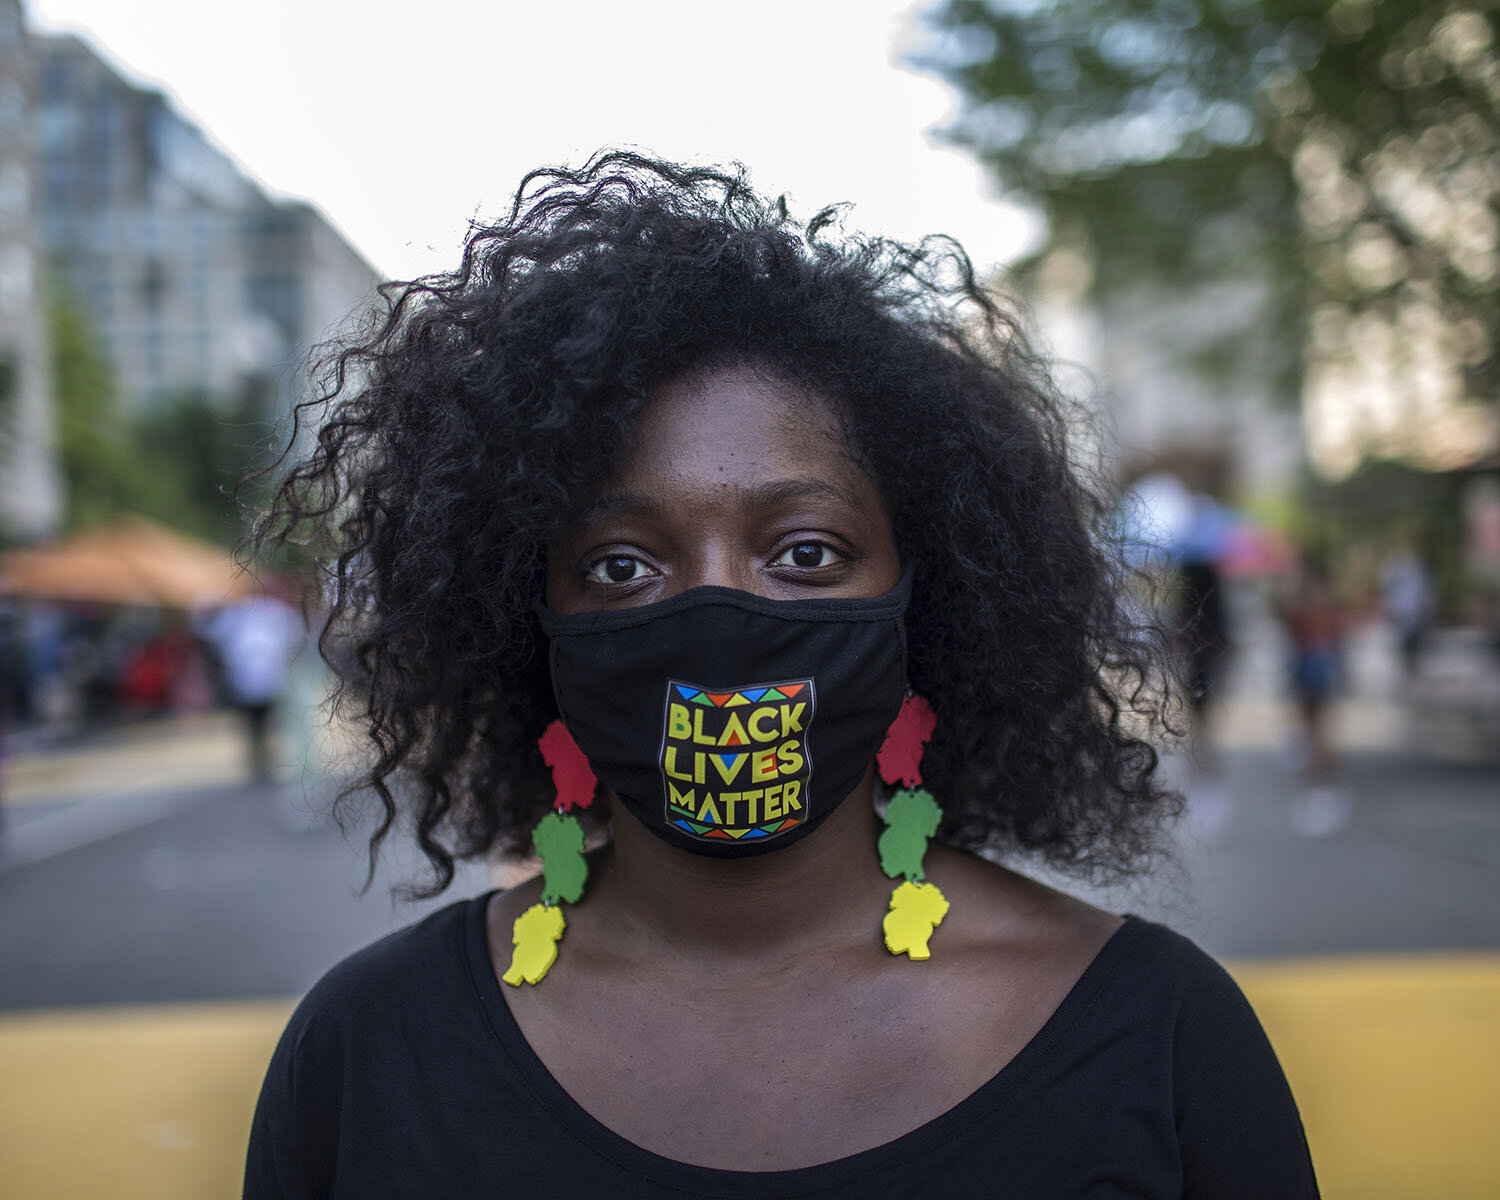  Name: Zoe Cadore  Age: 30  Occupation: Energy Policy Advisor   Date and Place the photo was taken: June 19, 2020, Black Lives Matter Plaza, Washington D.C. U.S.A.  Her Statement: "For the first time in my life, I have felt safe expressing the pains 